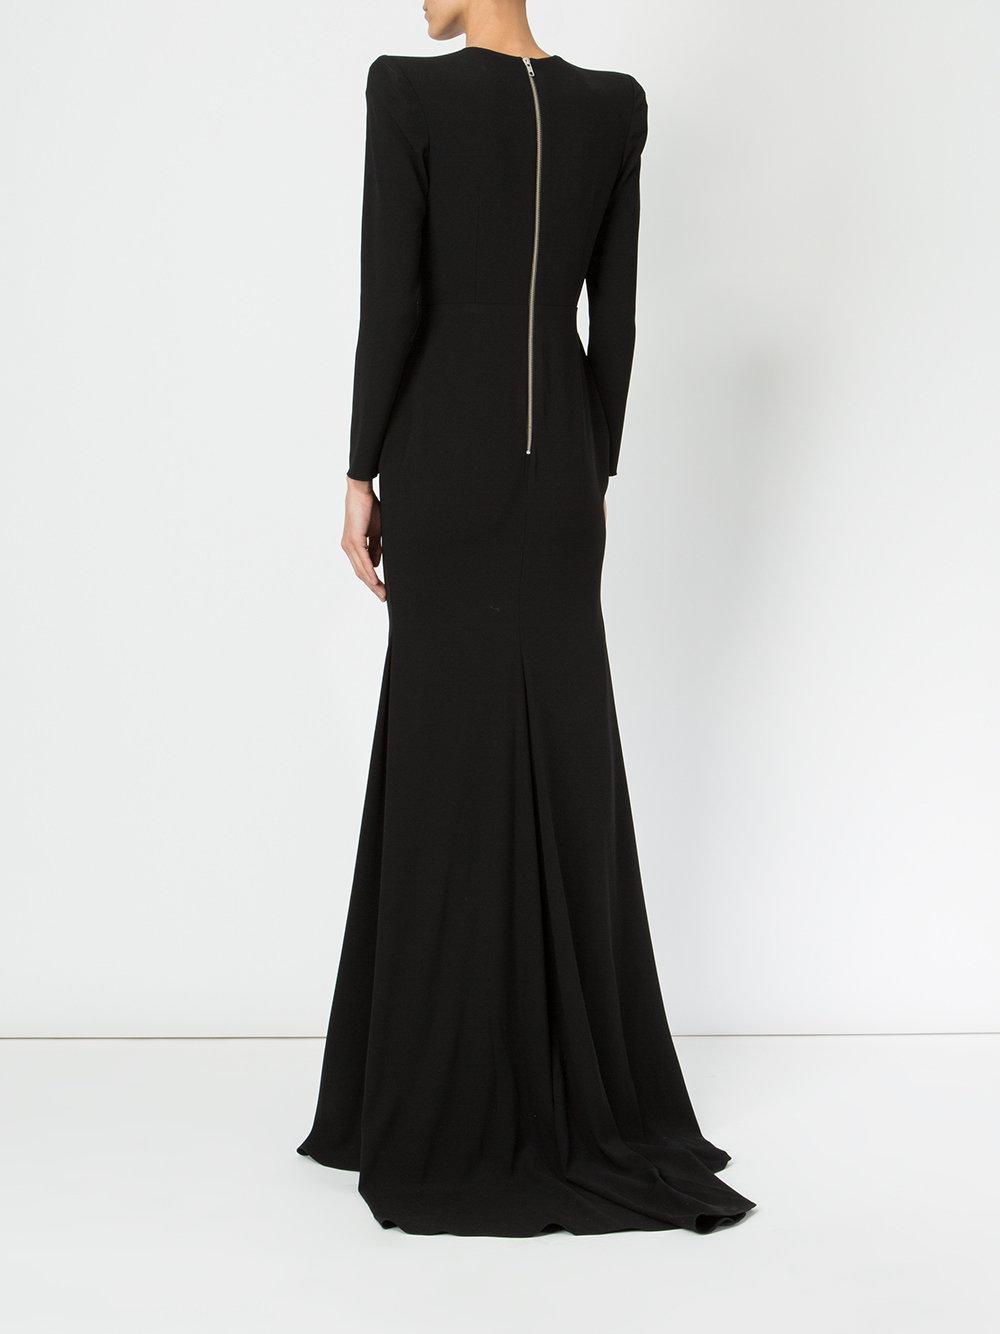 Alex Perry Long Embellished Gown in Black - Lyst